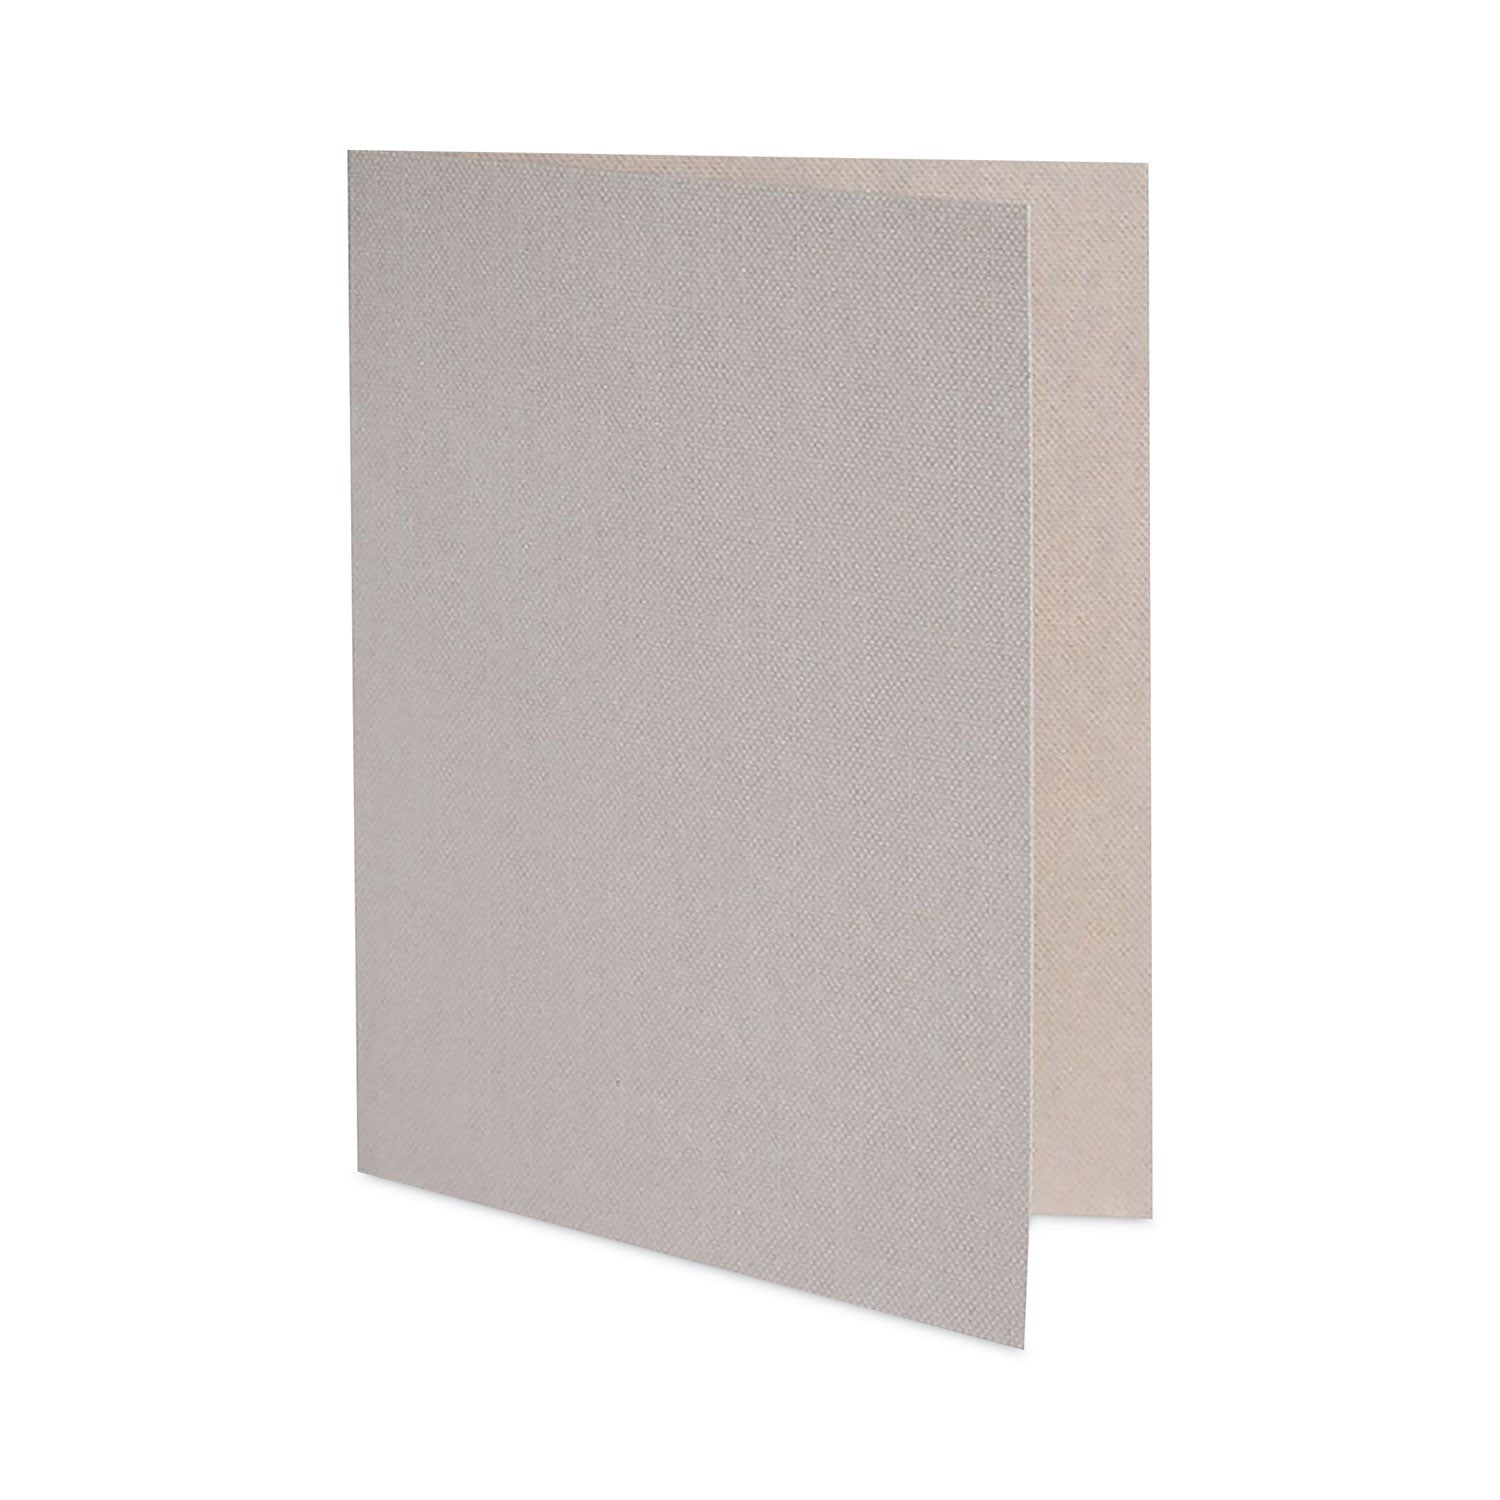 joy-insert-cards-425-x-55-12-assorted-color-cards-12-black-inserts-12-white-envelopes_ccu2007253 - 2